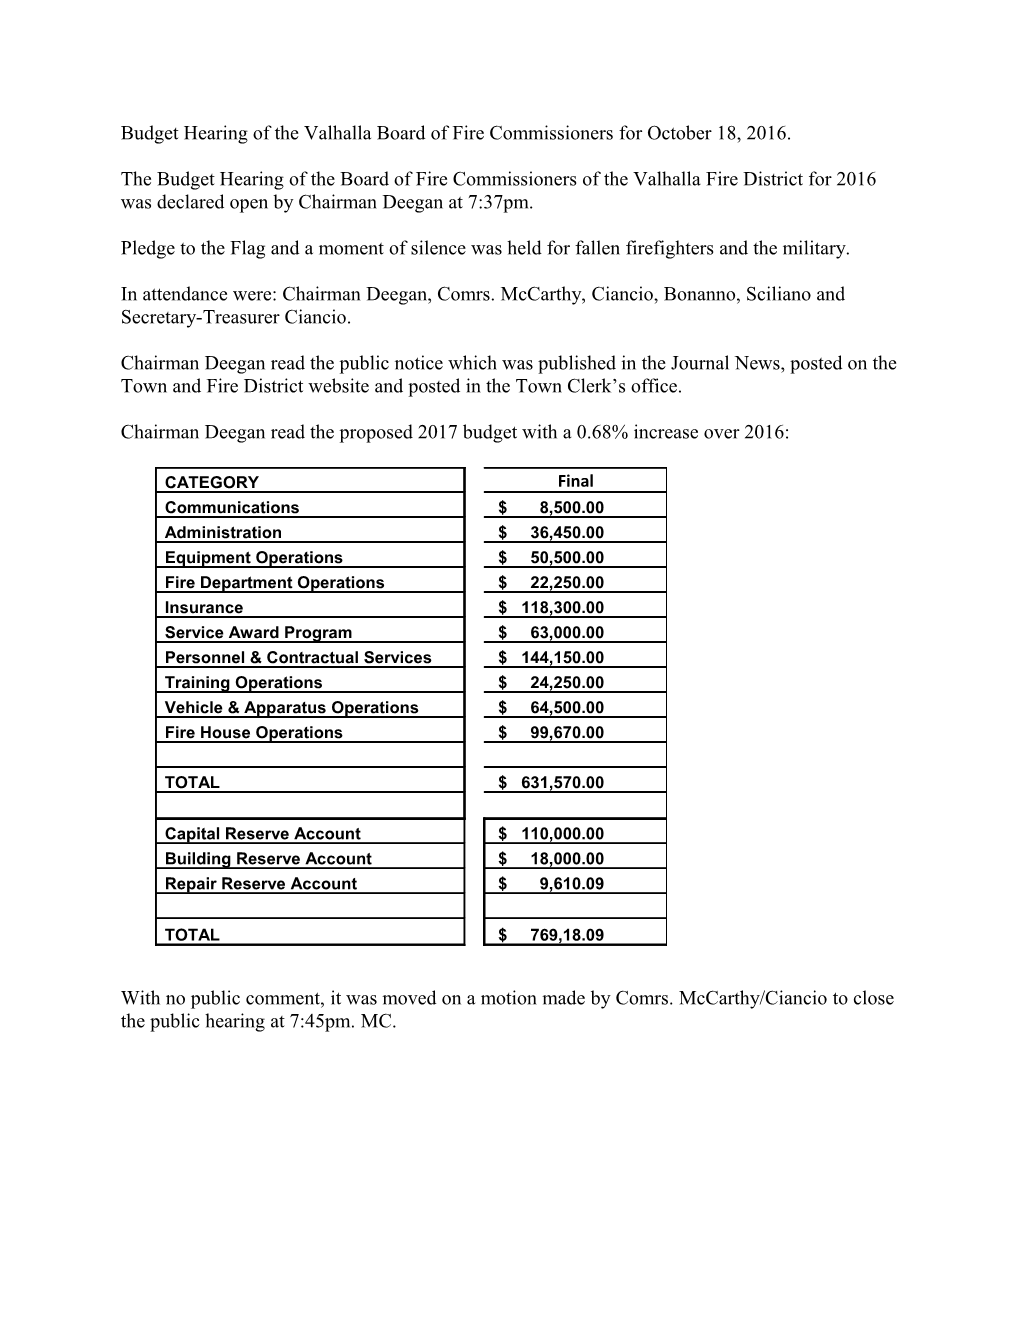 Budgethearing of the Valhalla Board of Fire Commissioners for October 18, 2016